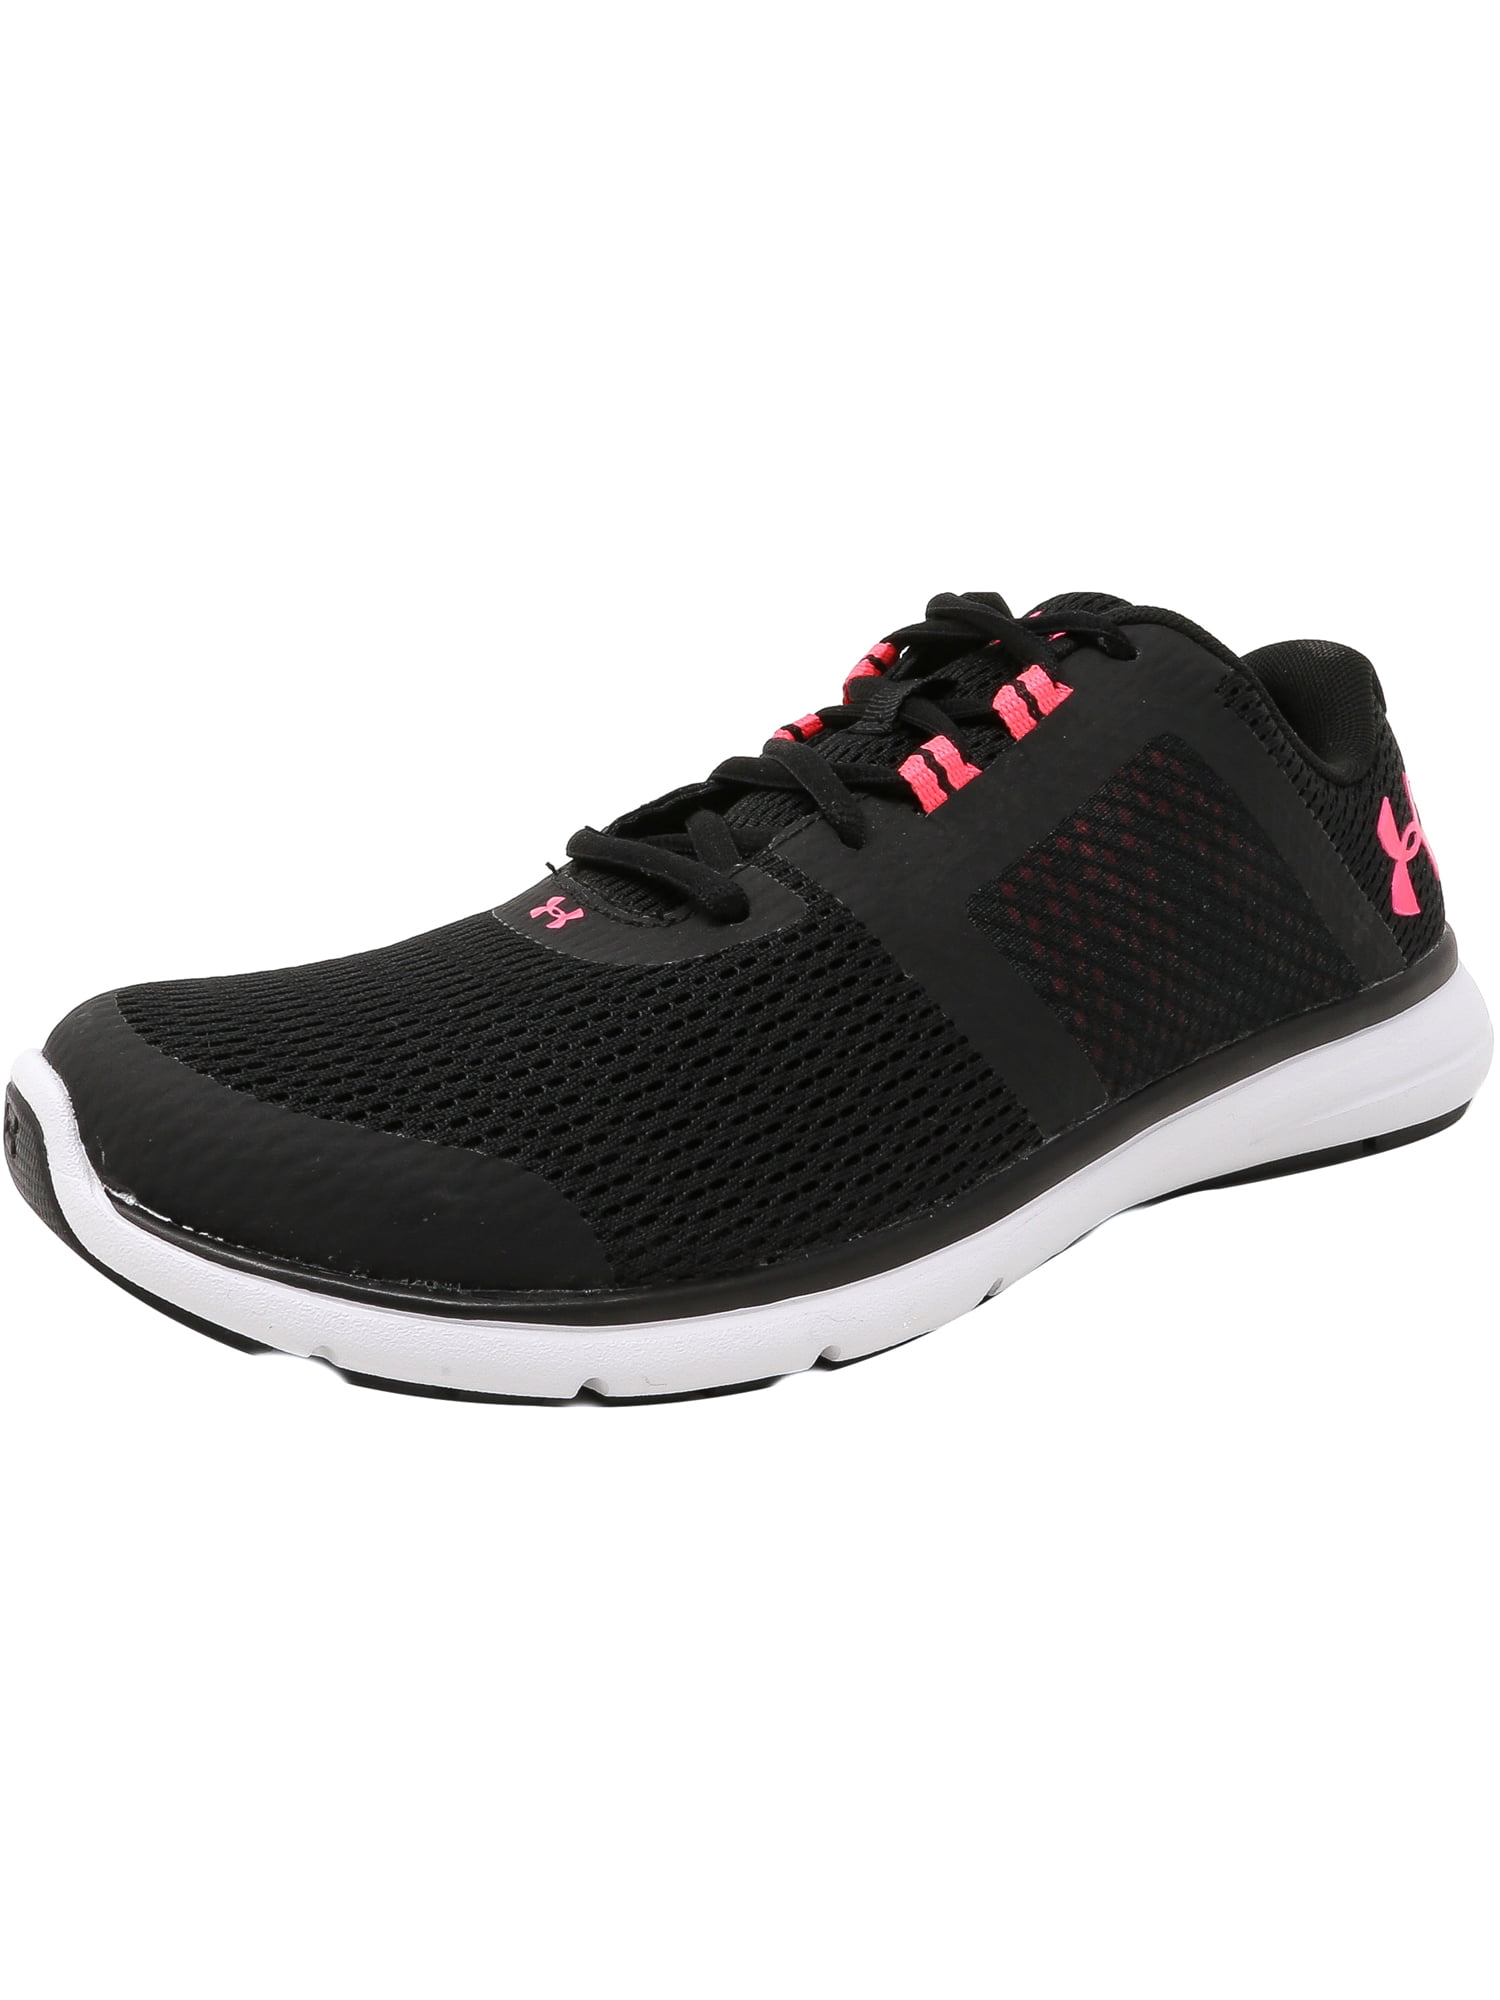 under armour fuse fst